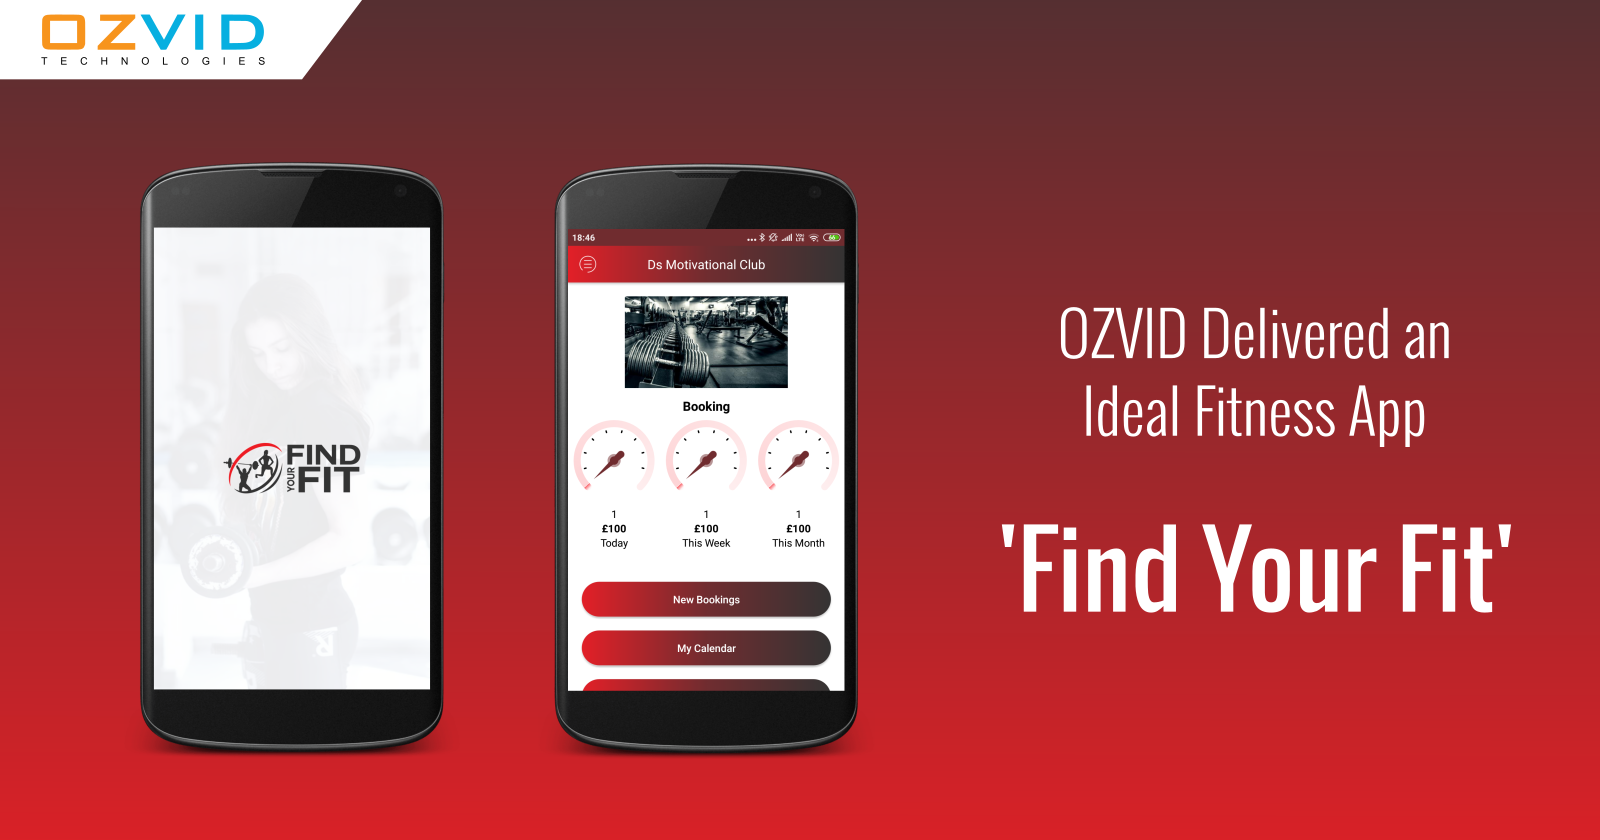 OZVID Delivered an Ideal Fitness App 'Find Your Fit'